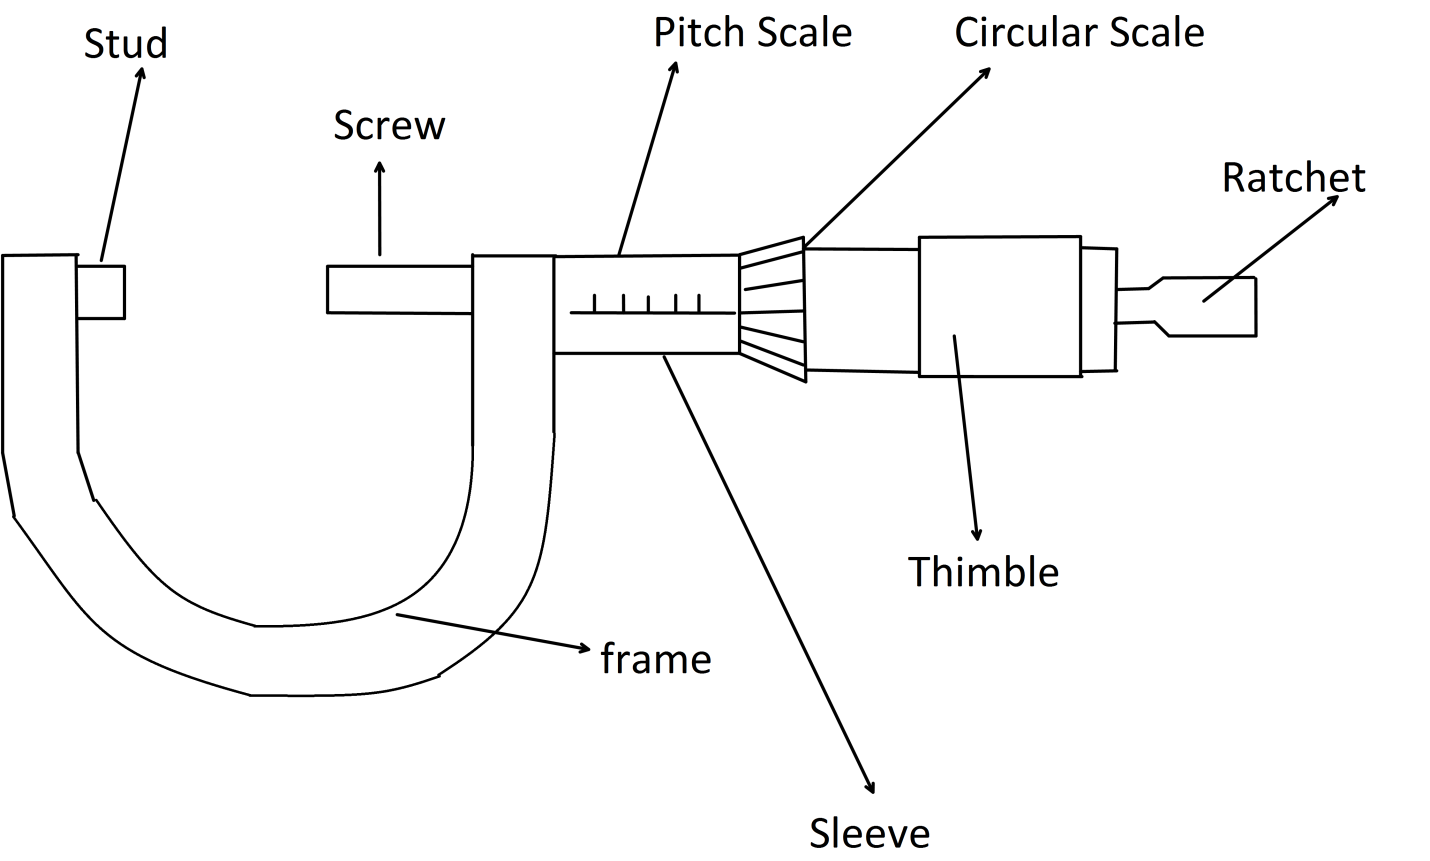 Micrometer Parts And Functions